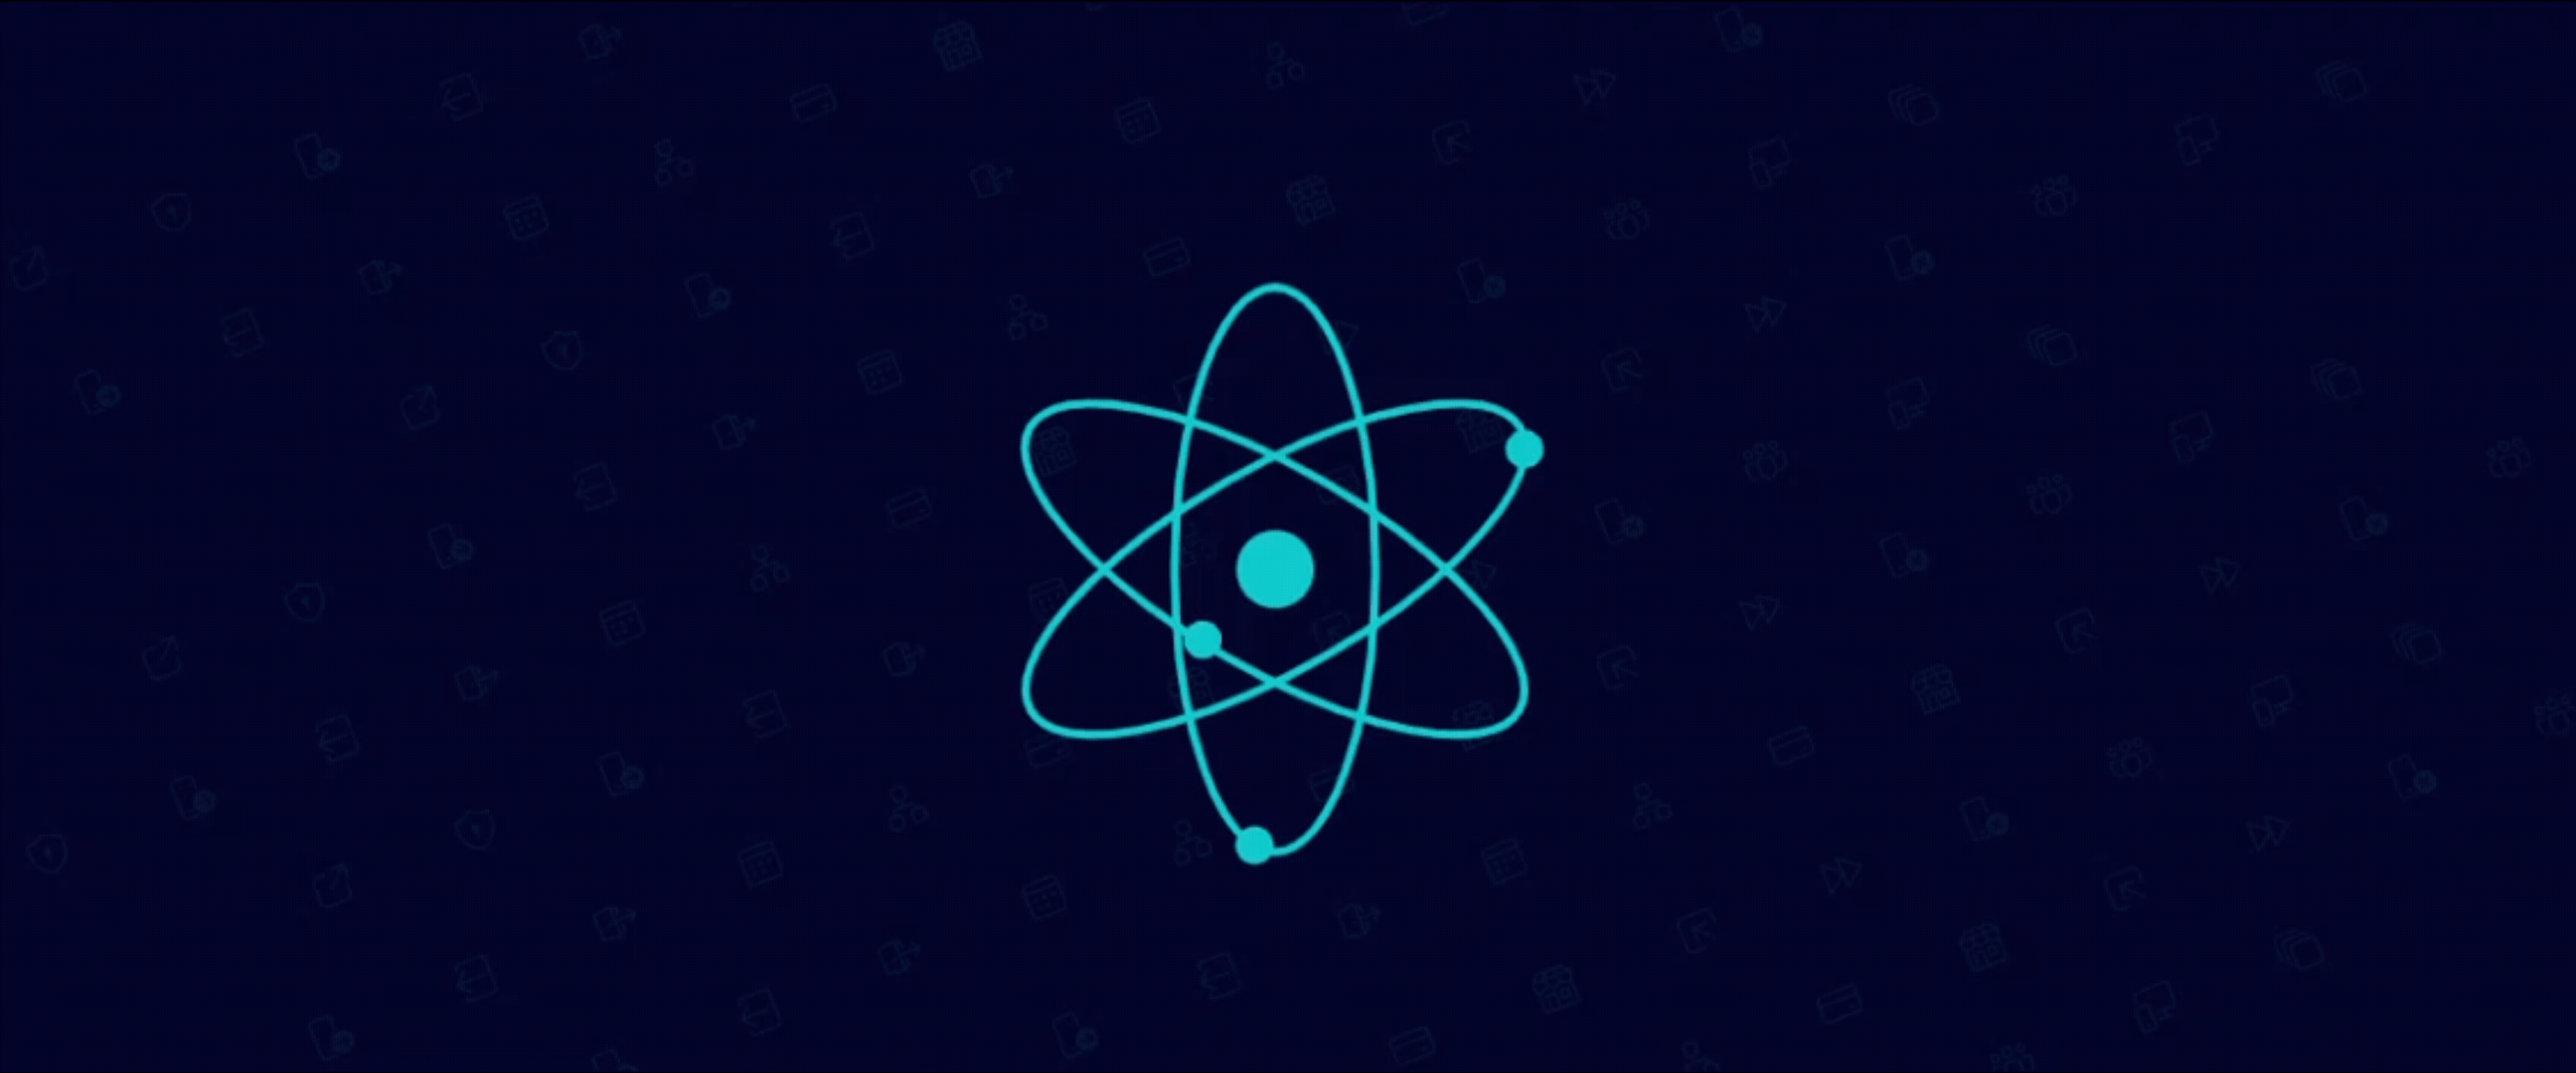 Atom gif used as identification/ branding for Razorpay Discovey